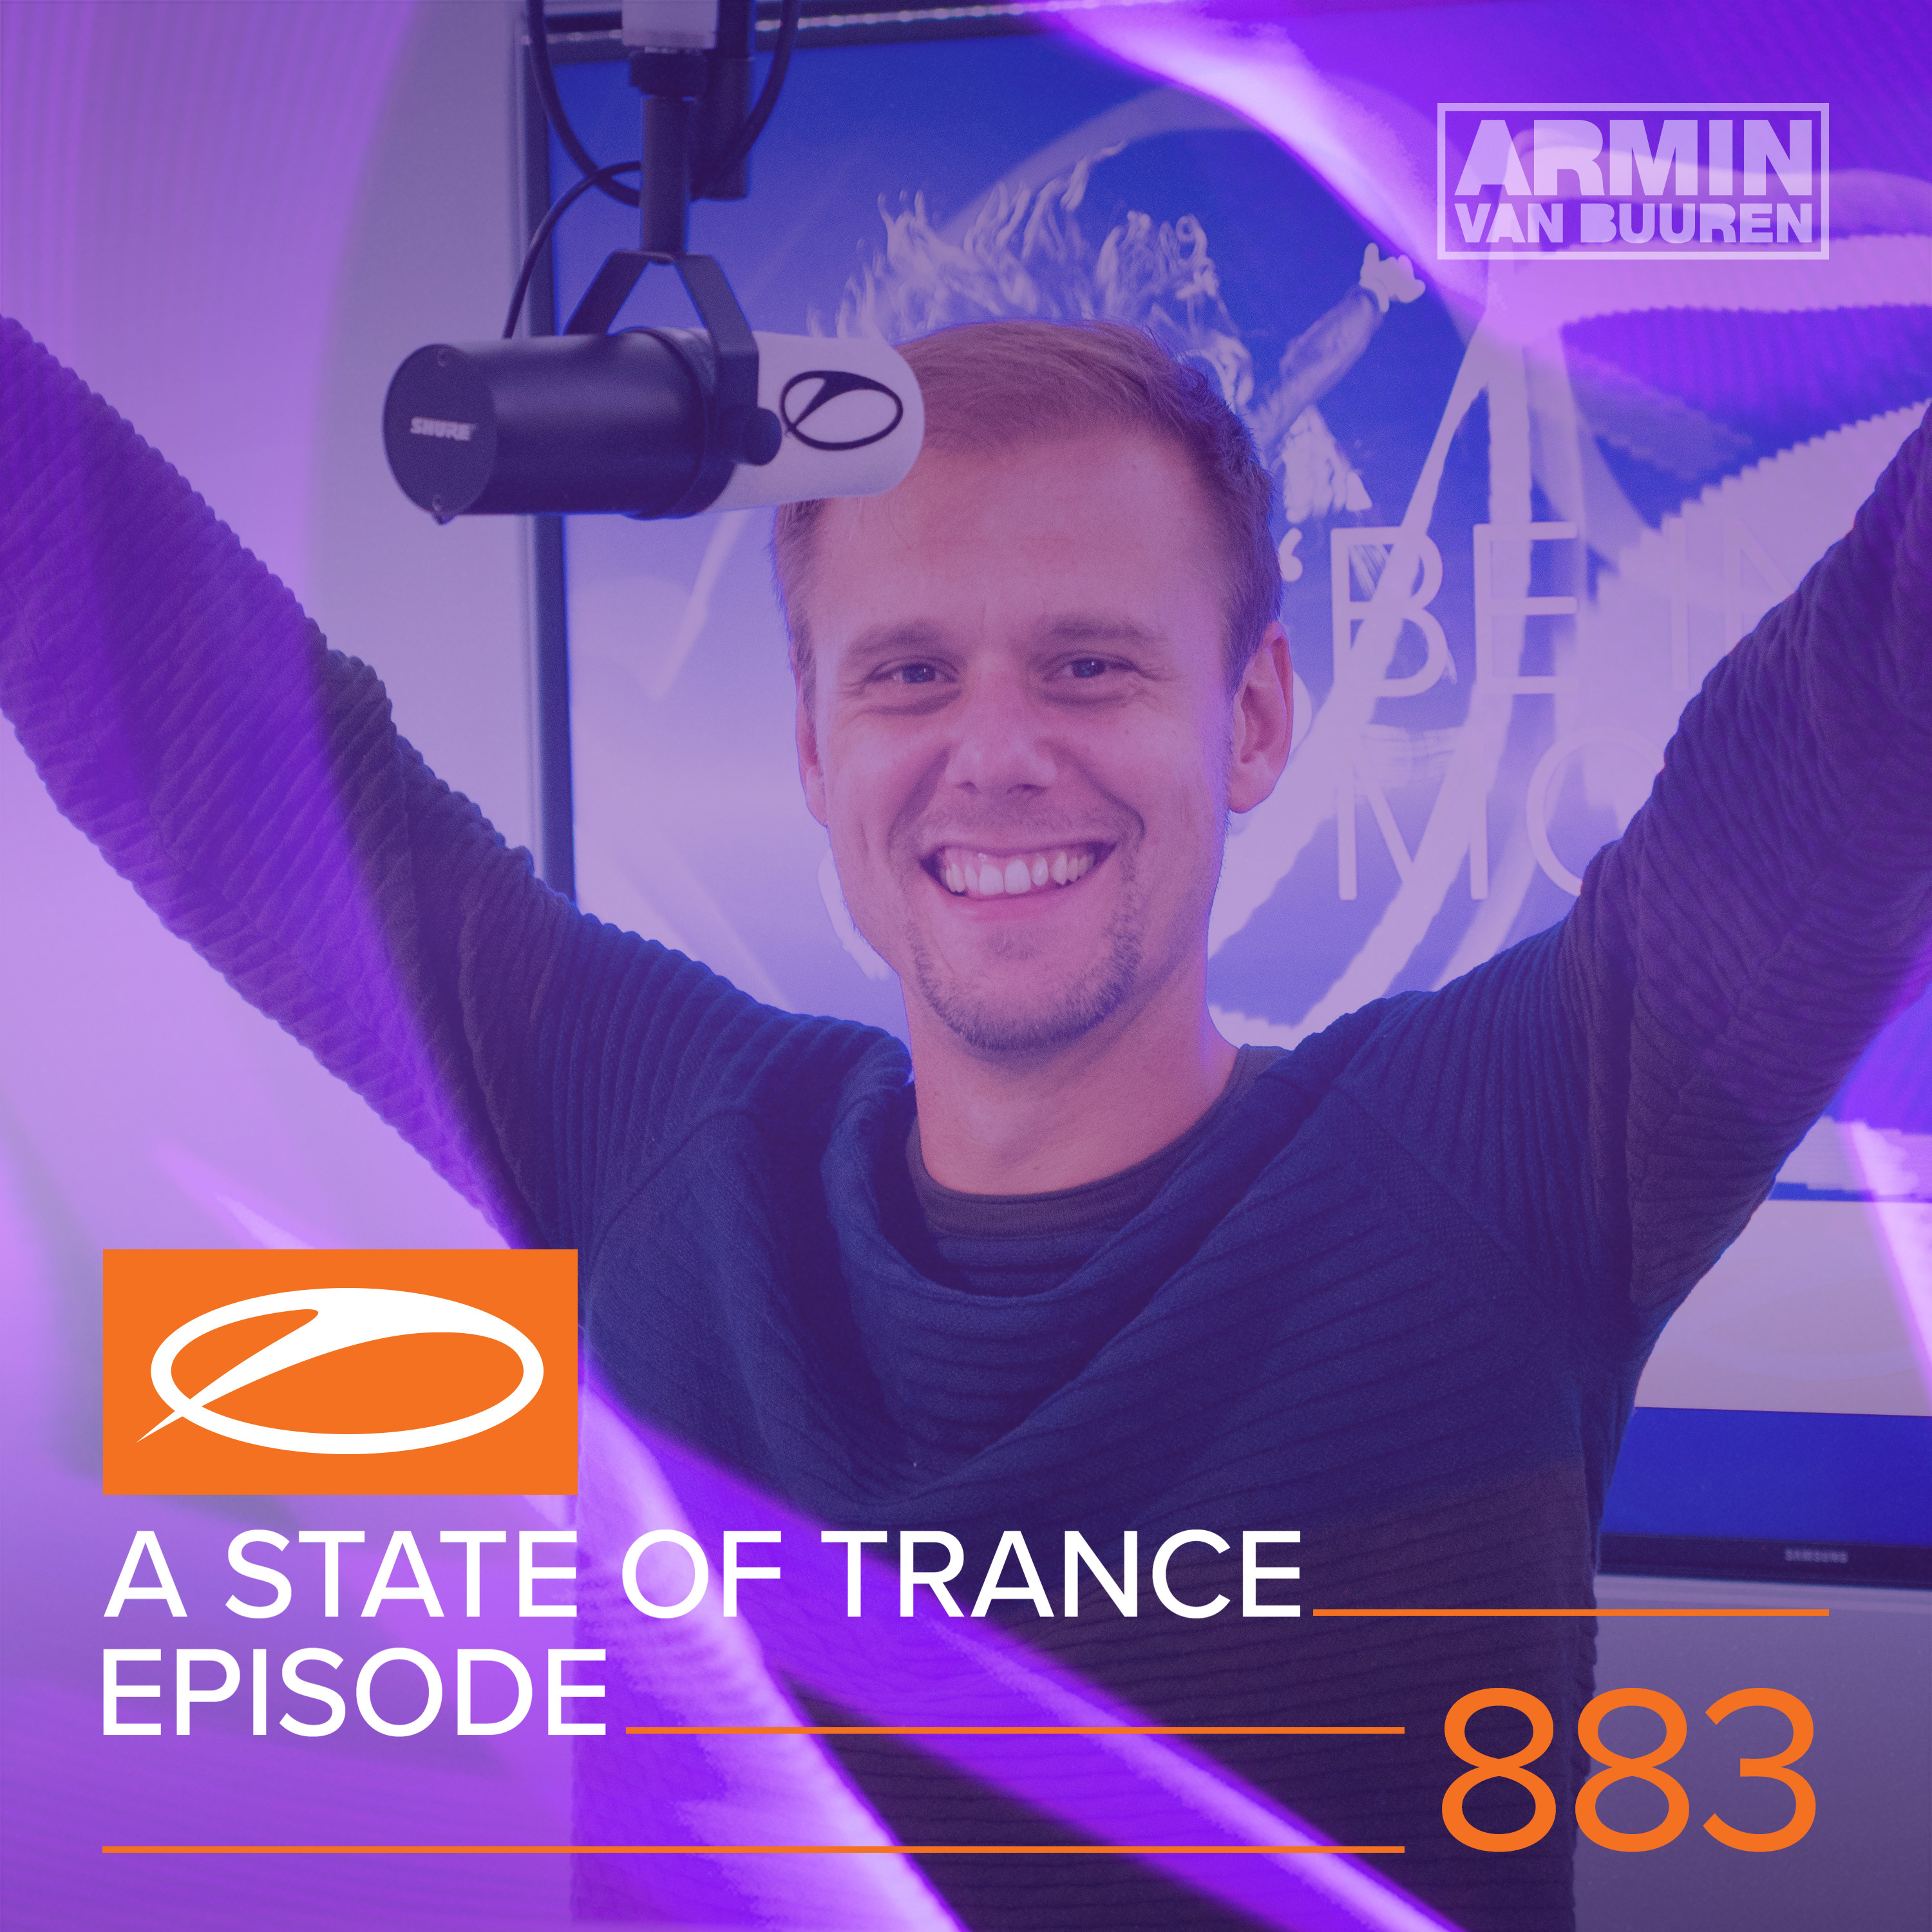 A State Of Trance (ASOT 883) (This Week's Service For Dreamers, Pt. 2)